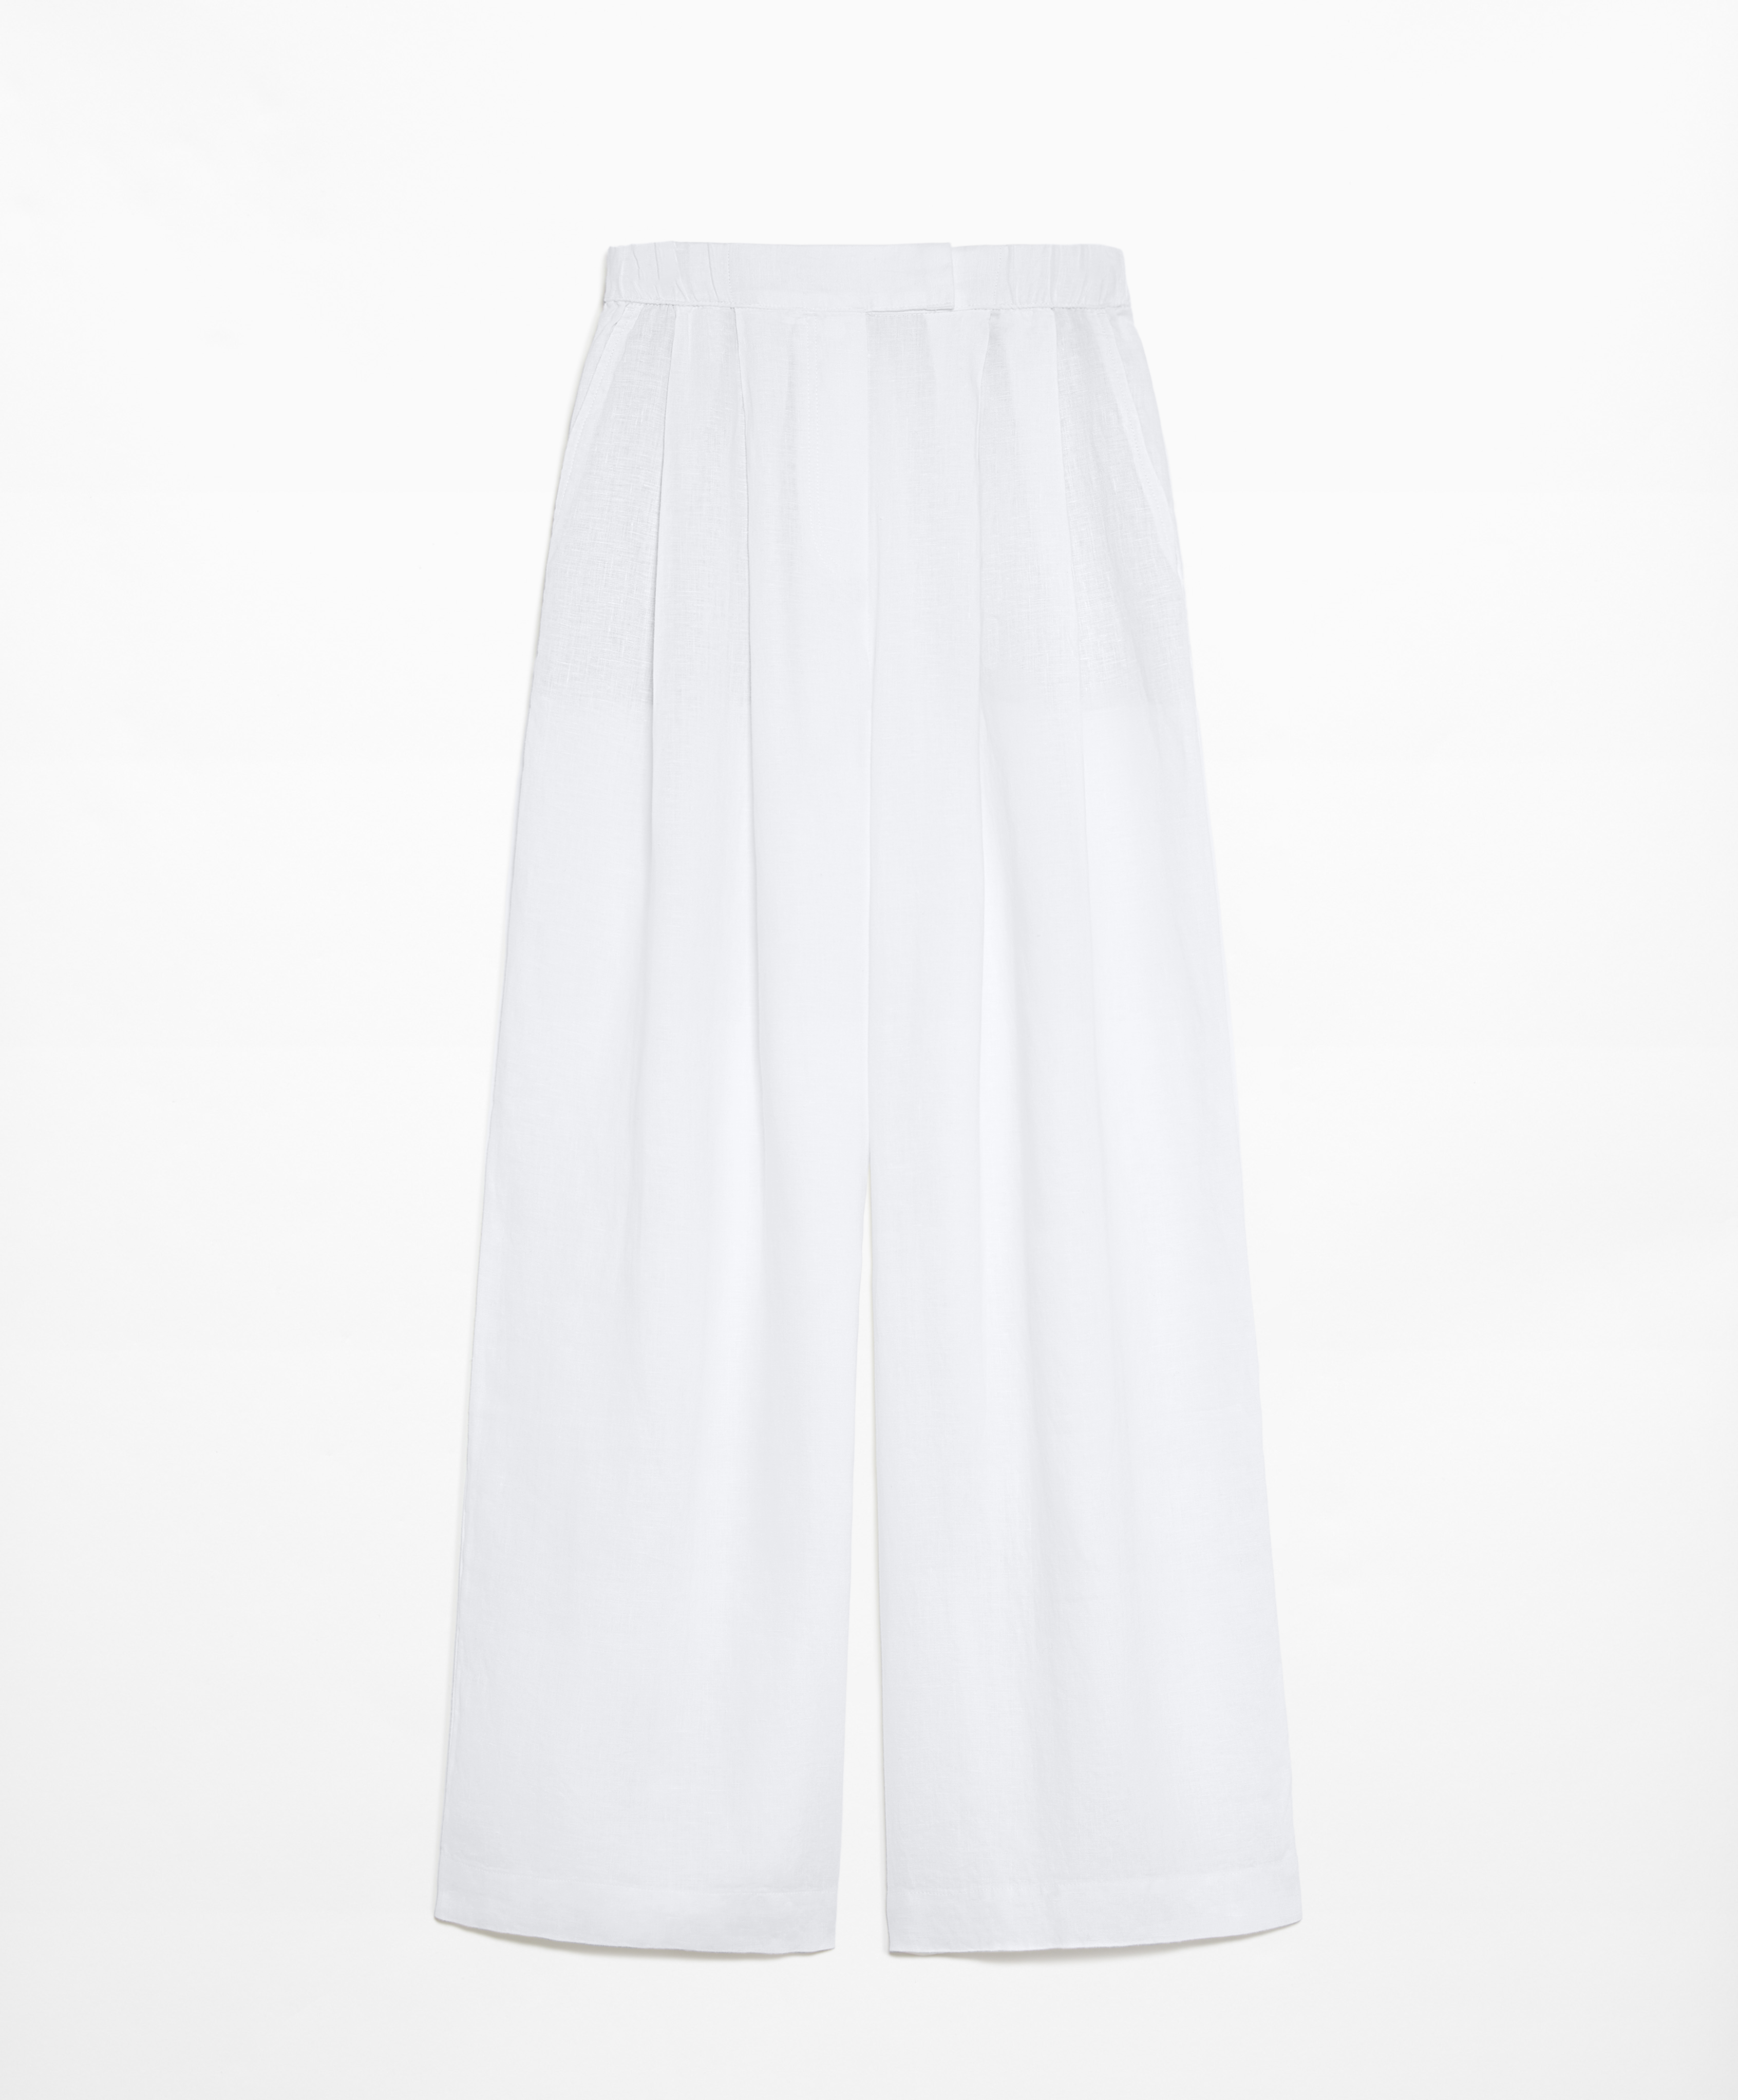 Tailored-fit 100% linen trousers